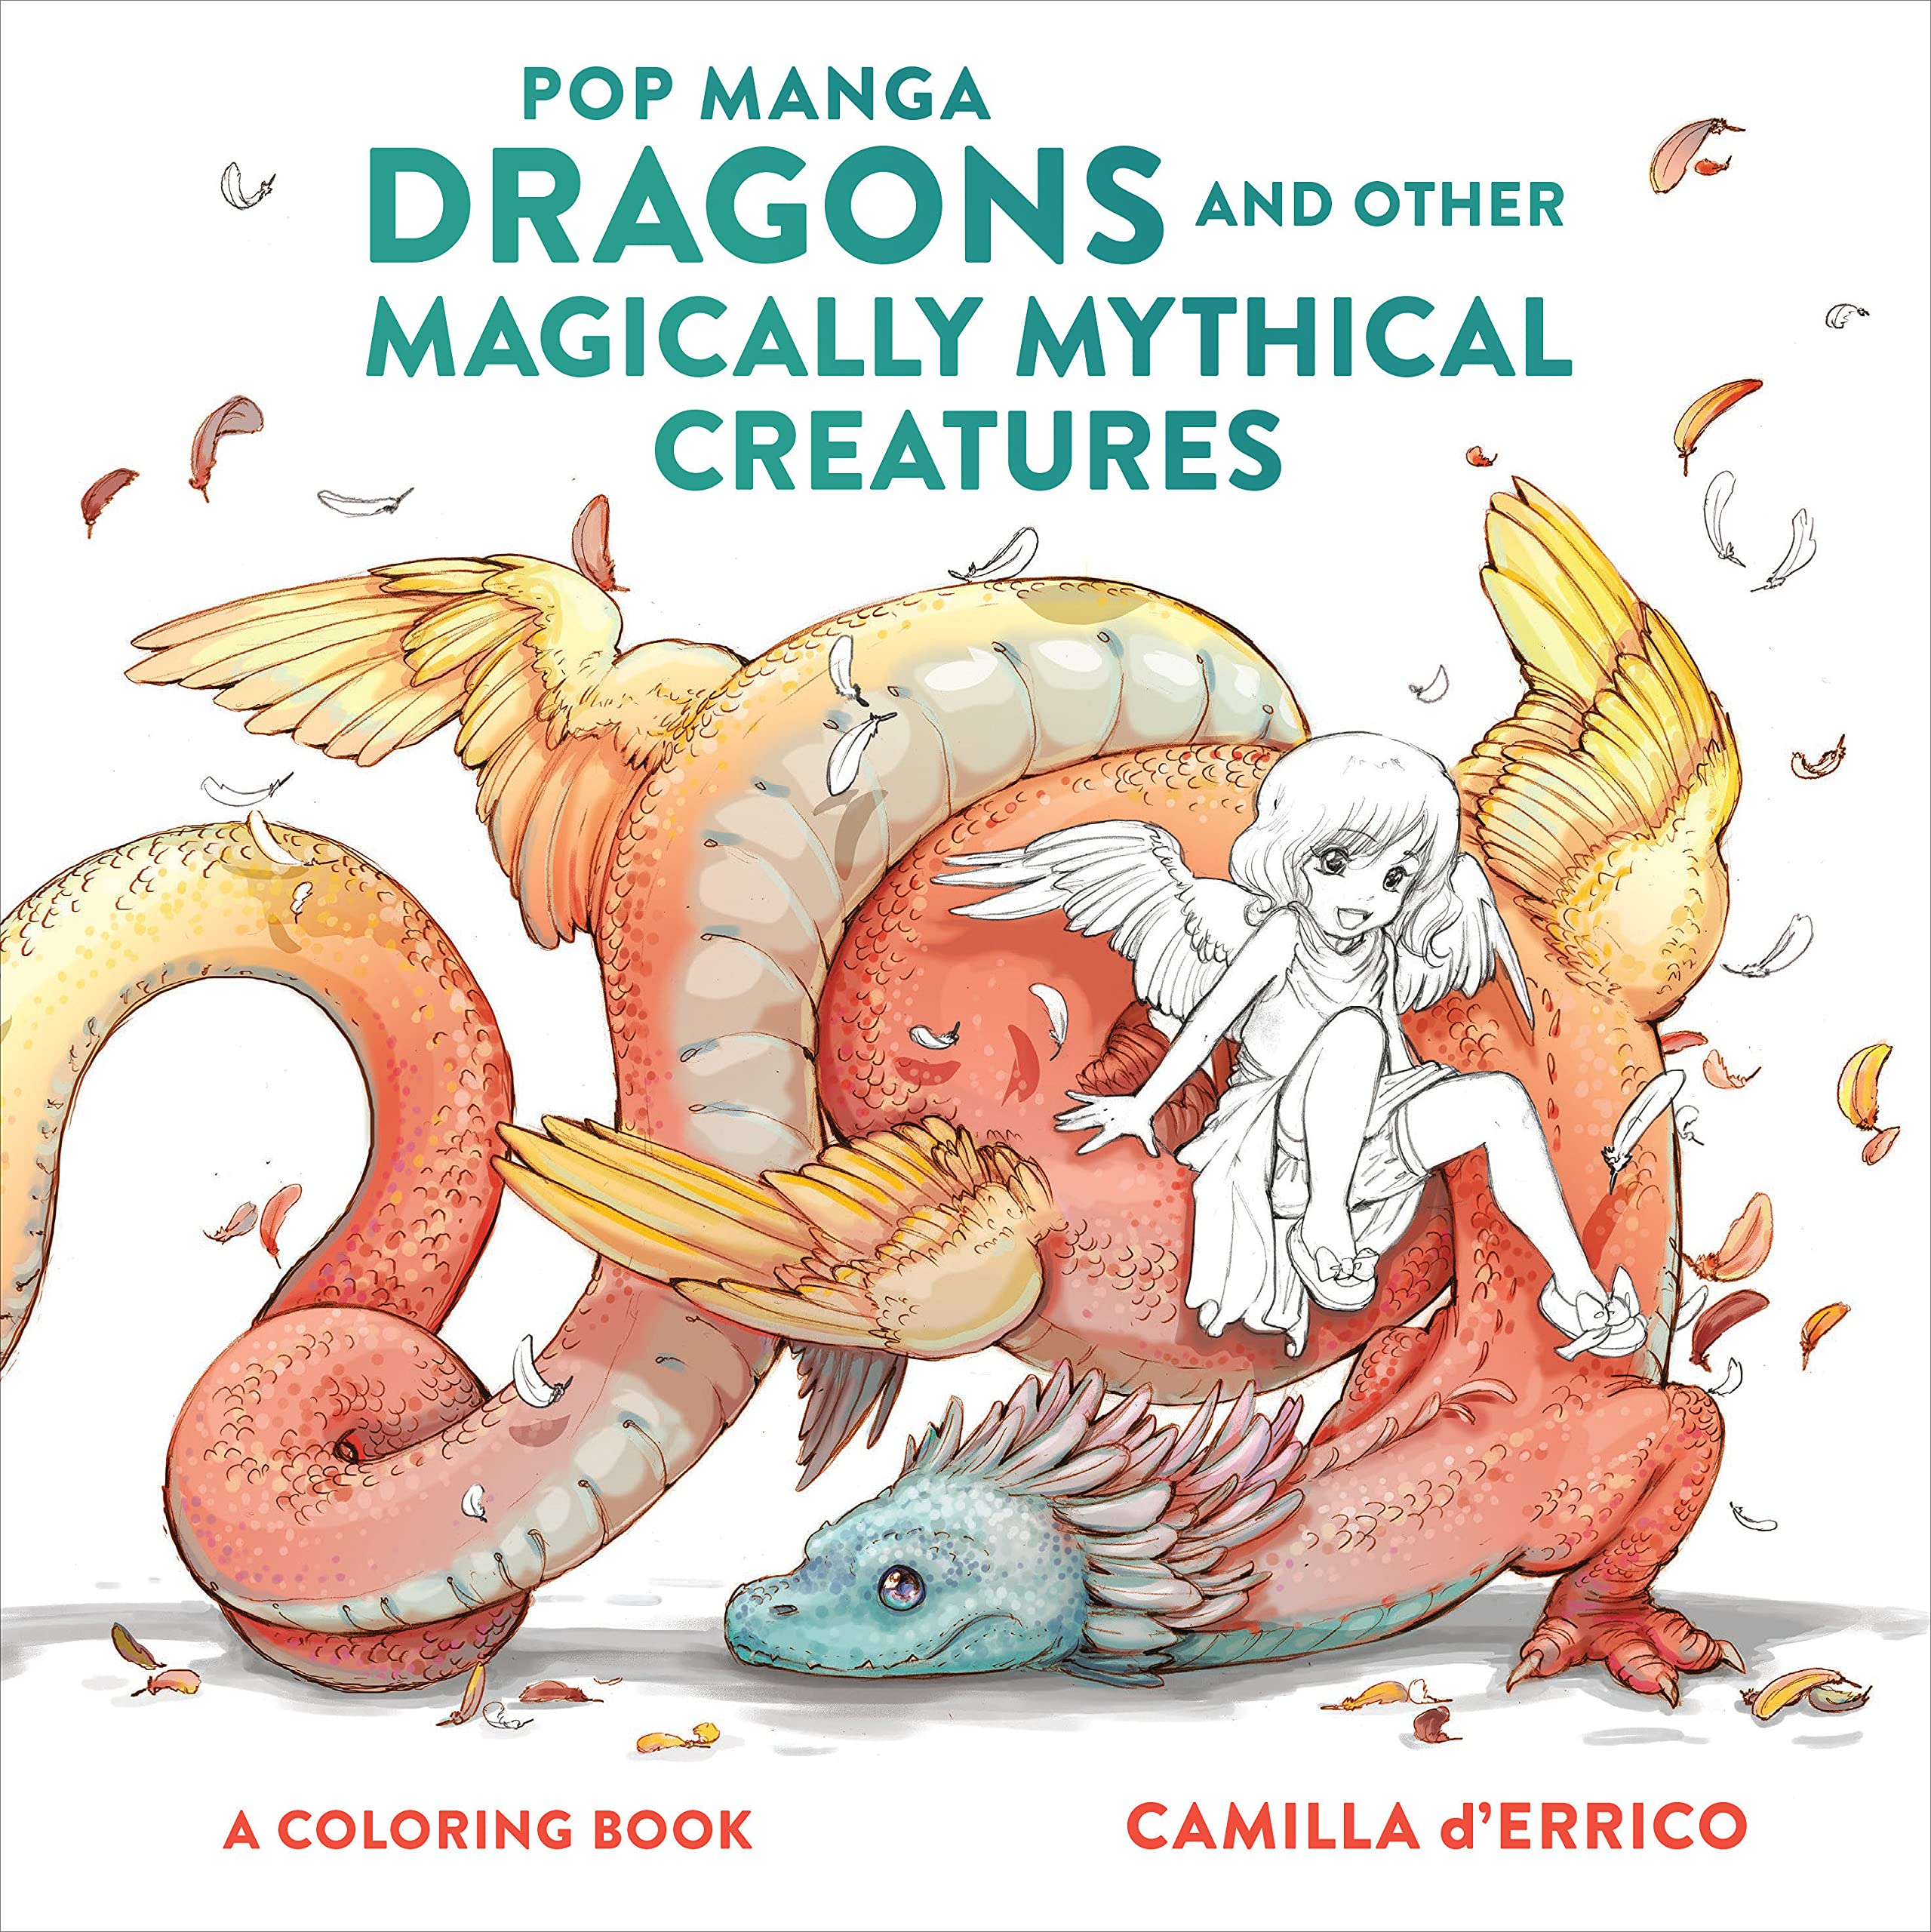 Pop Manga Dragons and Other Magically Mythical Creatures - A Coloring Book